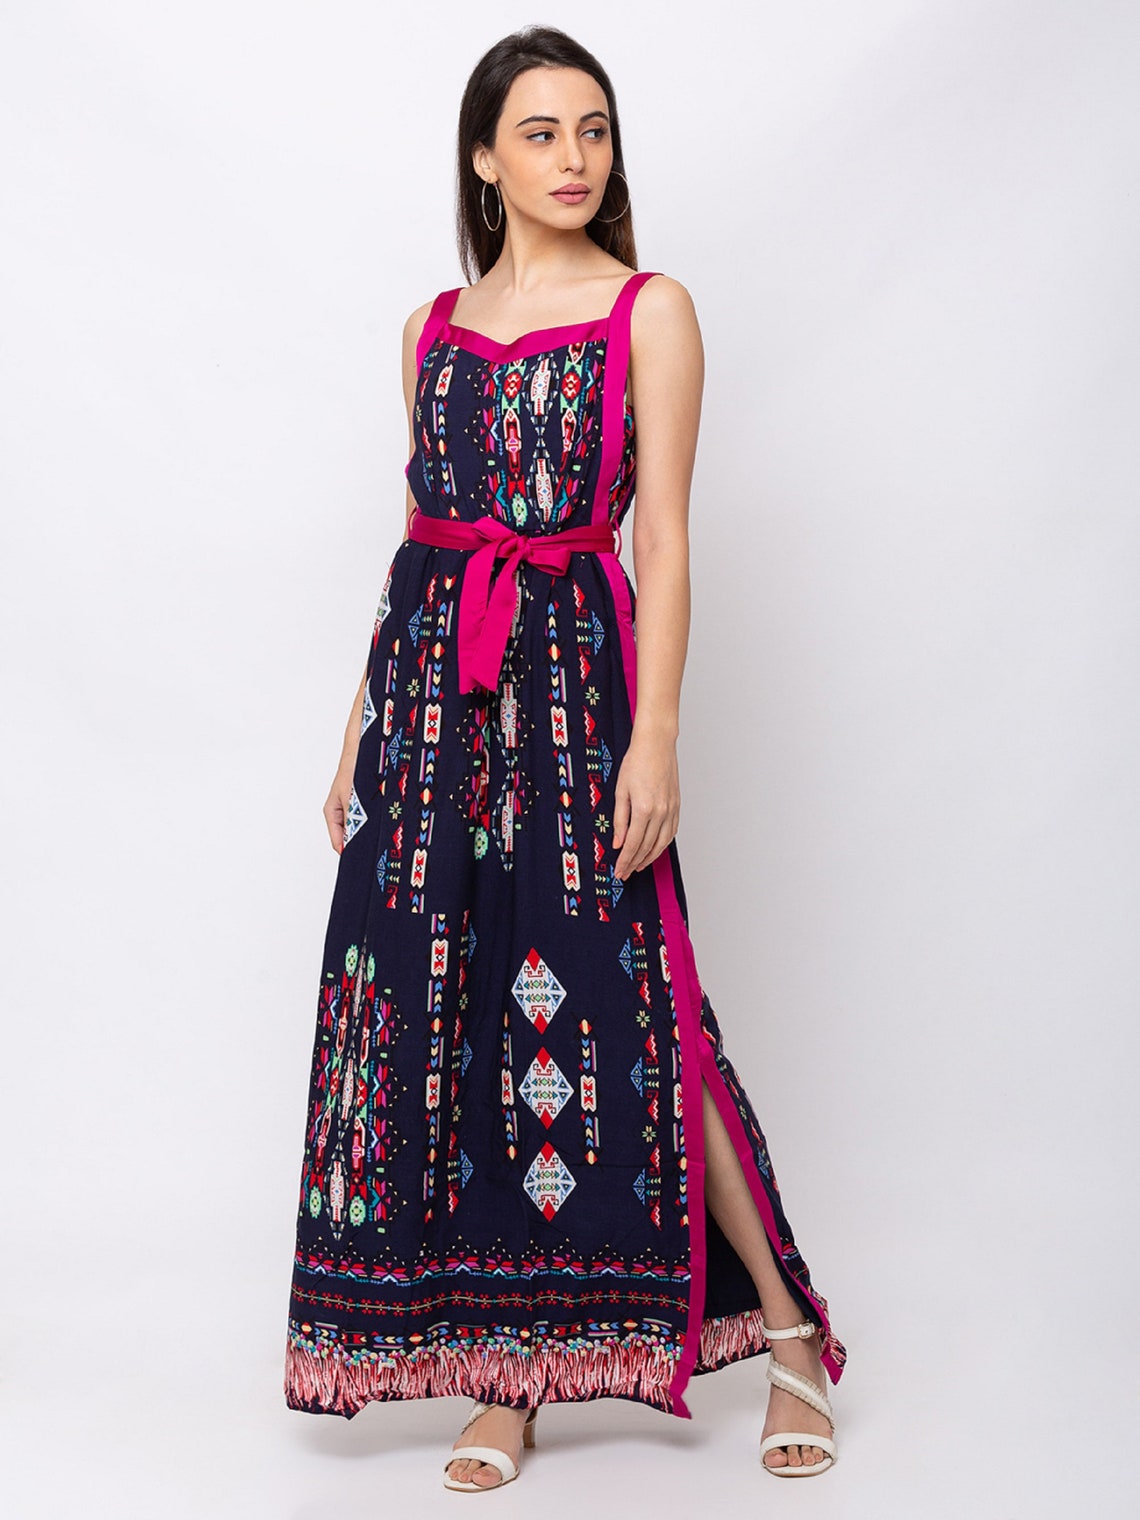 Indian Sleeveless Maxi Dress for Women Multicolor Printed - Etsy